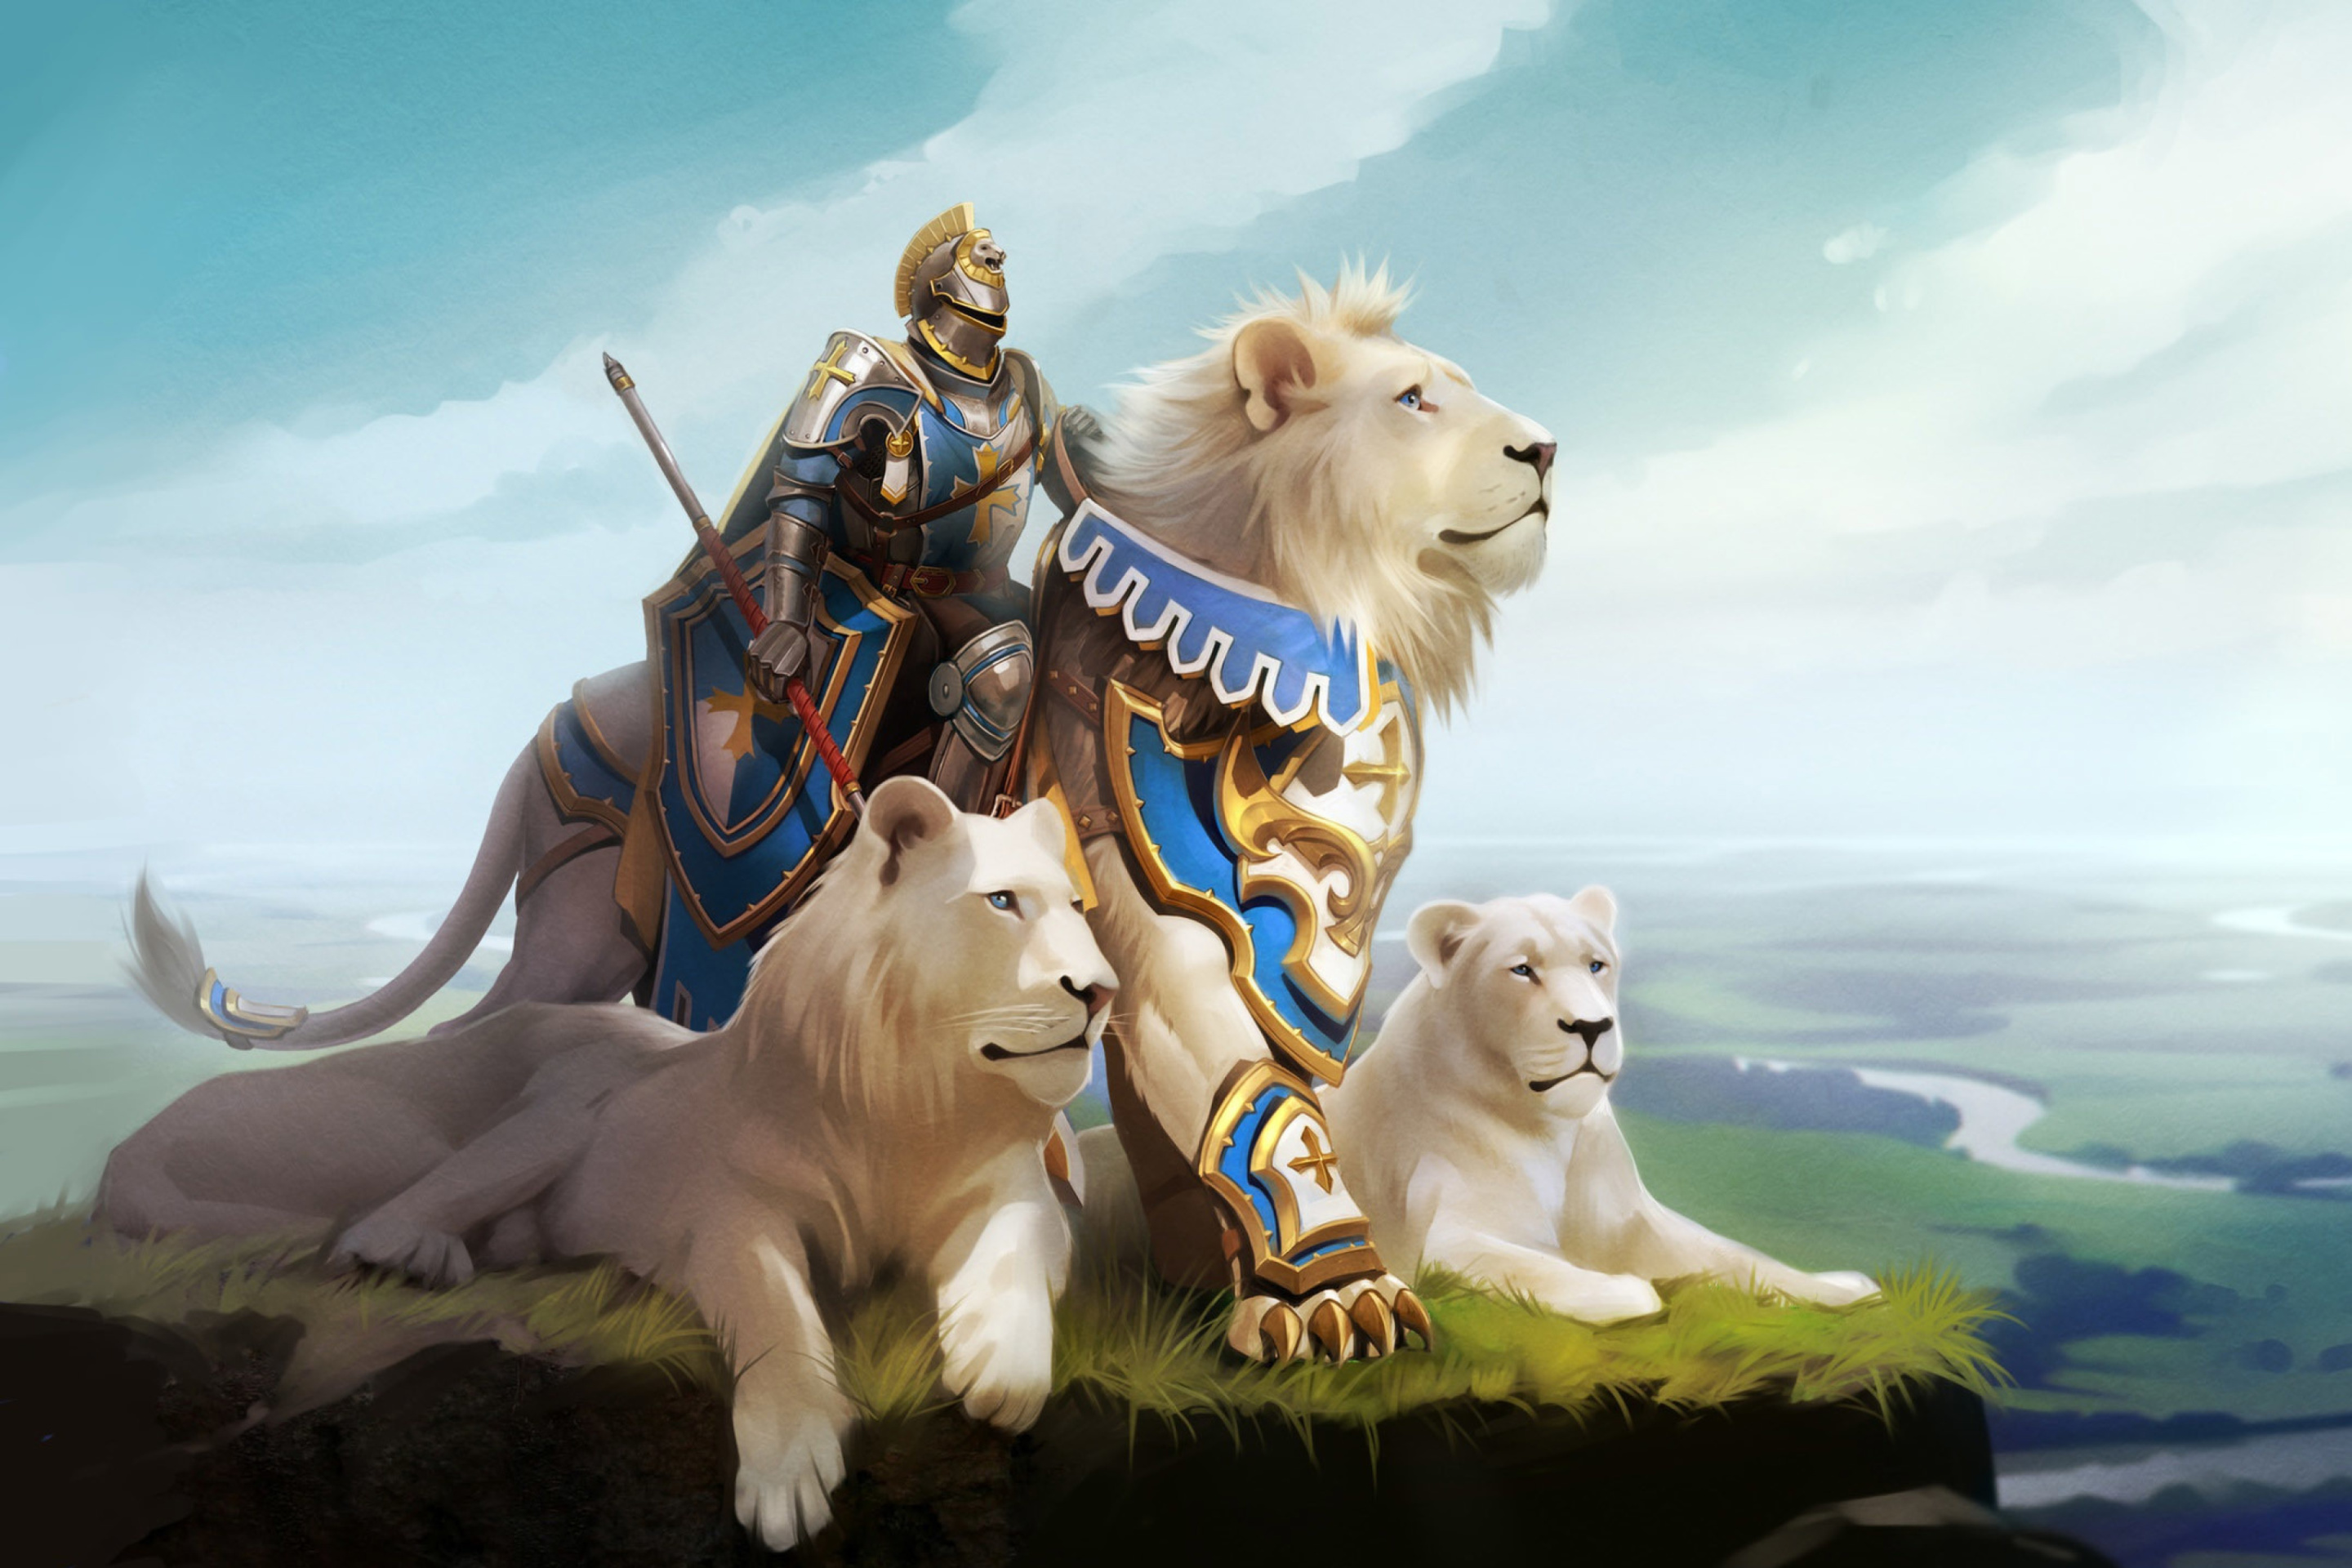 Das Knight with Lions Wallpaper 2880x1920